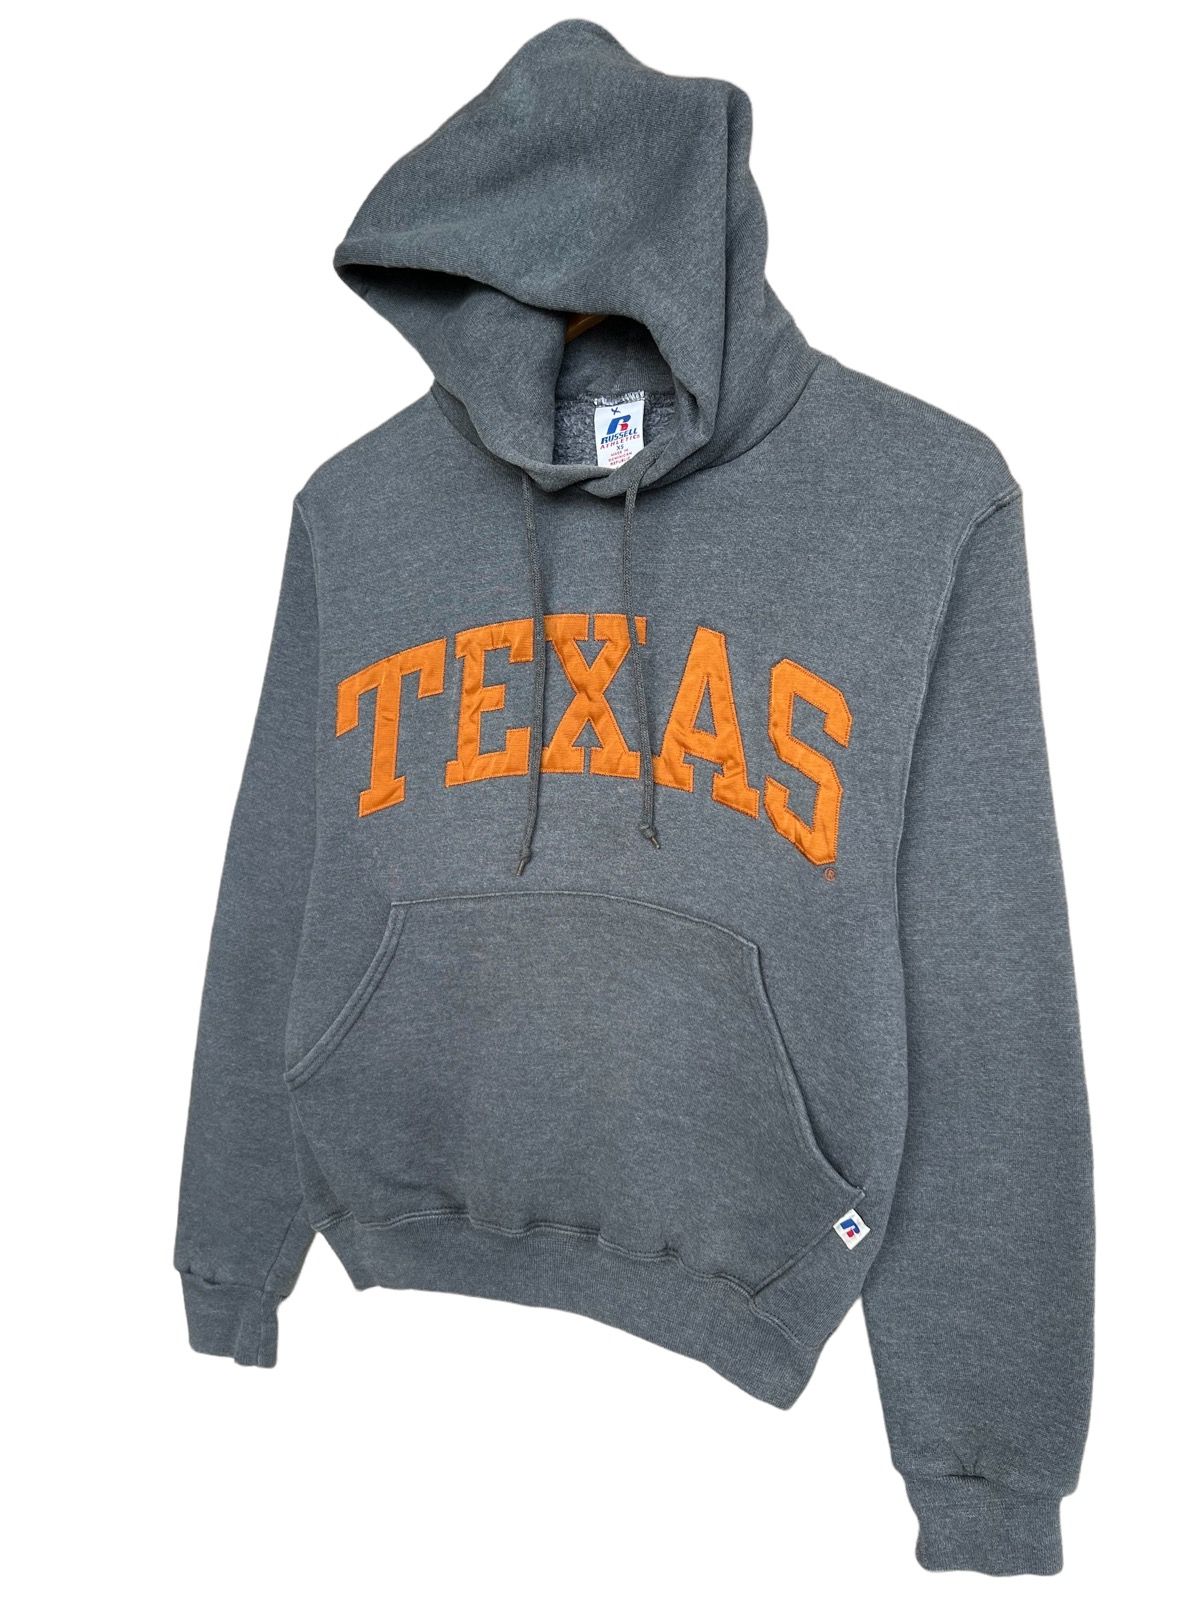 Vintage Russell Texas Spellout Hoodie University State - 2